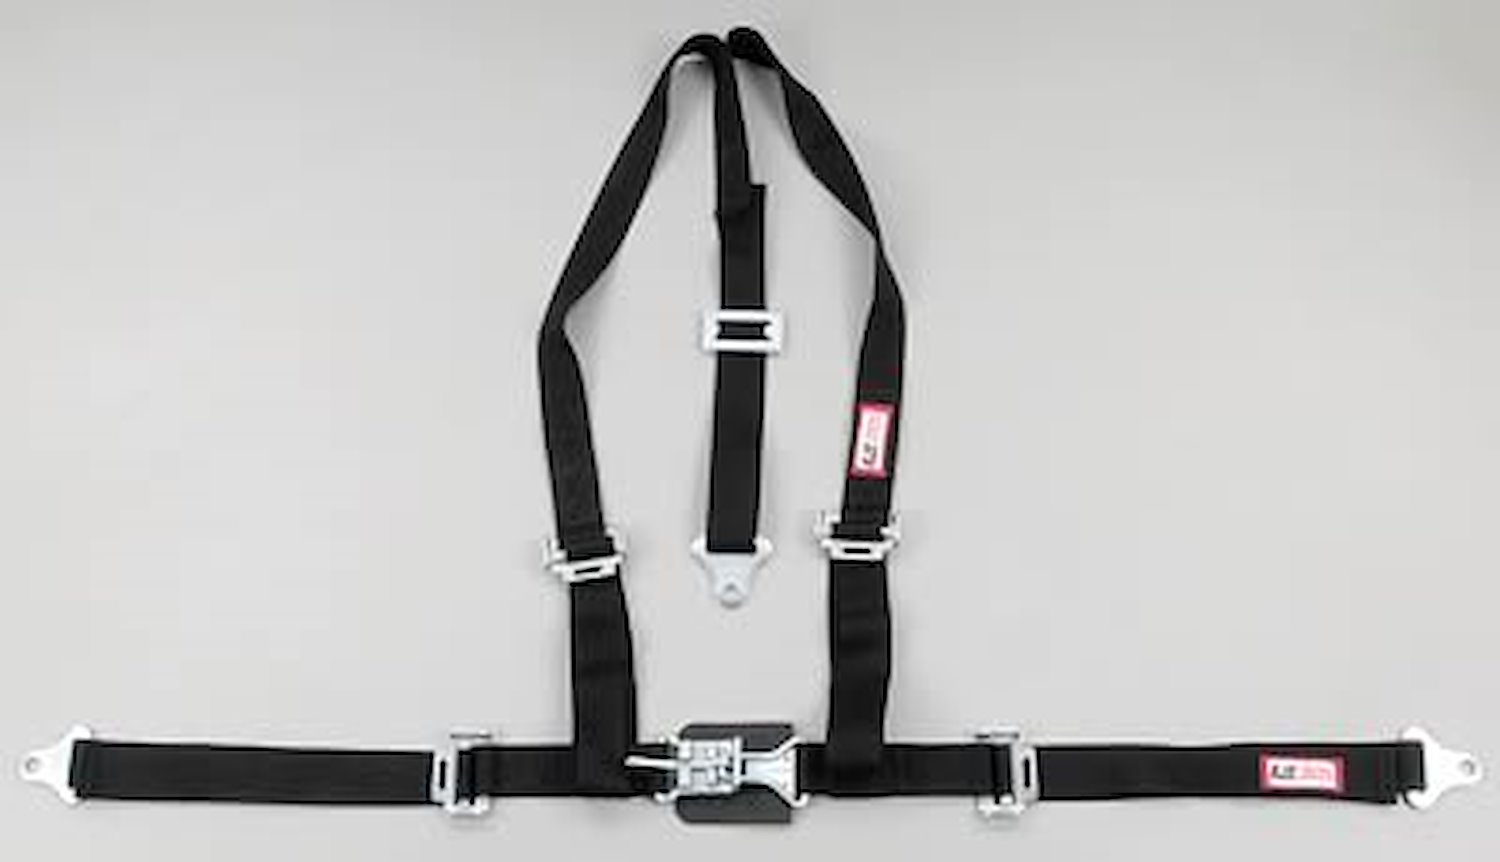 NON-SFI L&L HARNESS 2 PULL UP Lap Belt SEWN IN 2 S.H. V ROLL BAR Mount w/STERNUM STRAP ALL BOLT ENDS RED